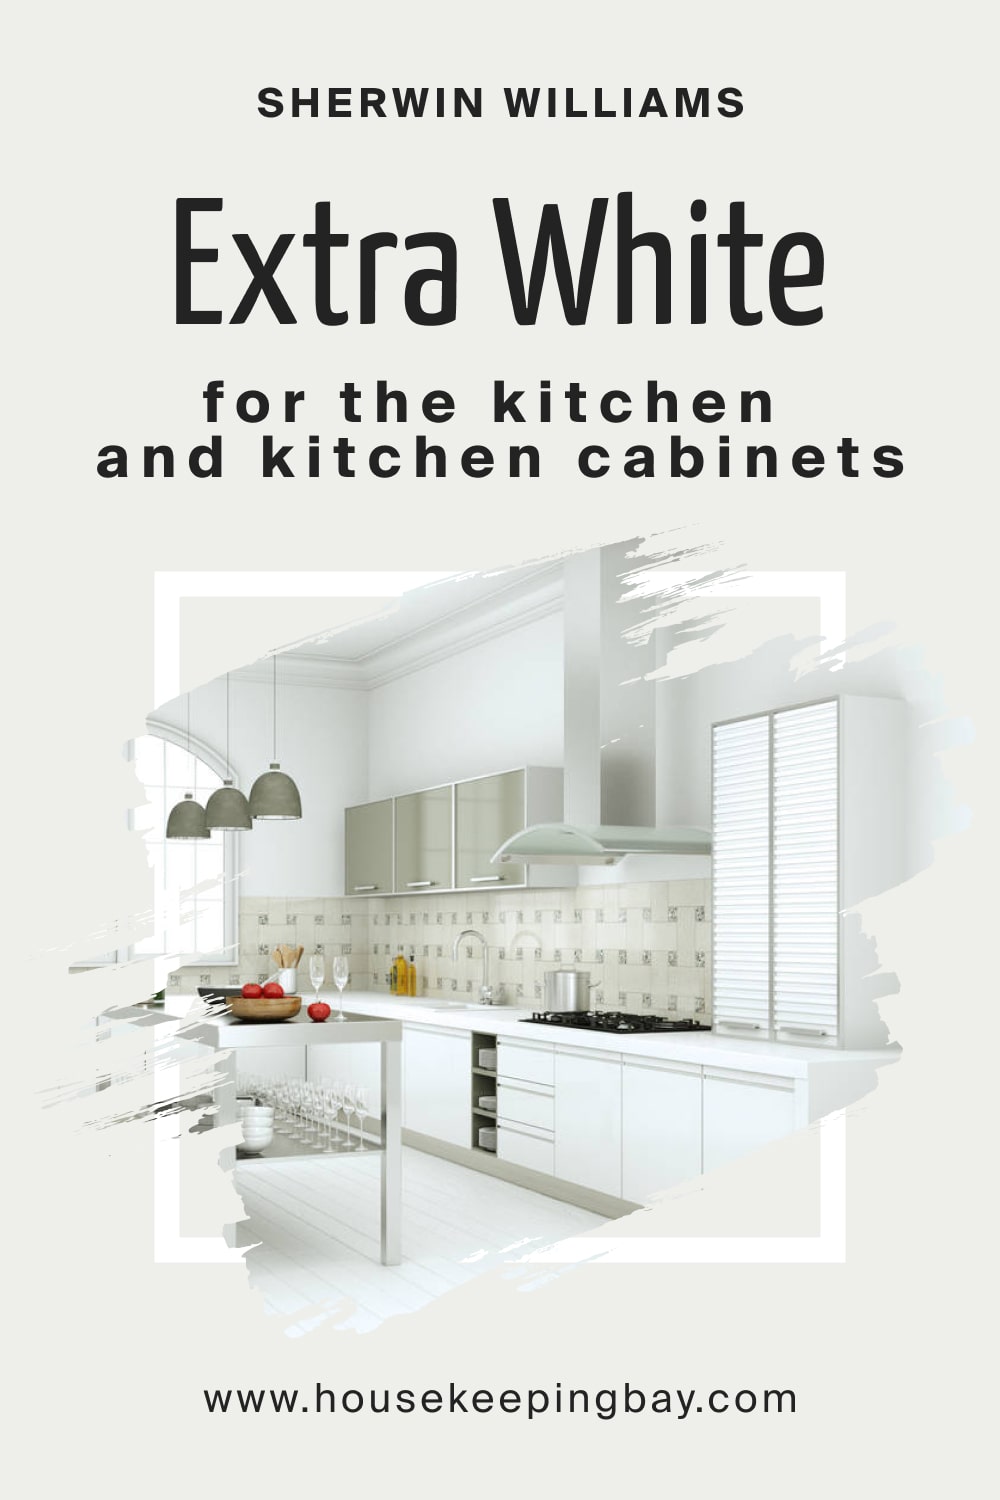 Sherwin Williams.Extra White SW 7006 For the Kitchen and Kitchen Cabinets